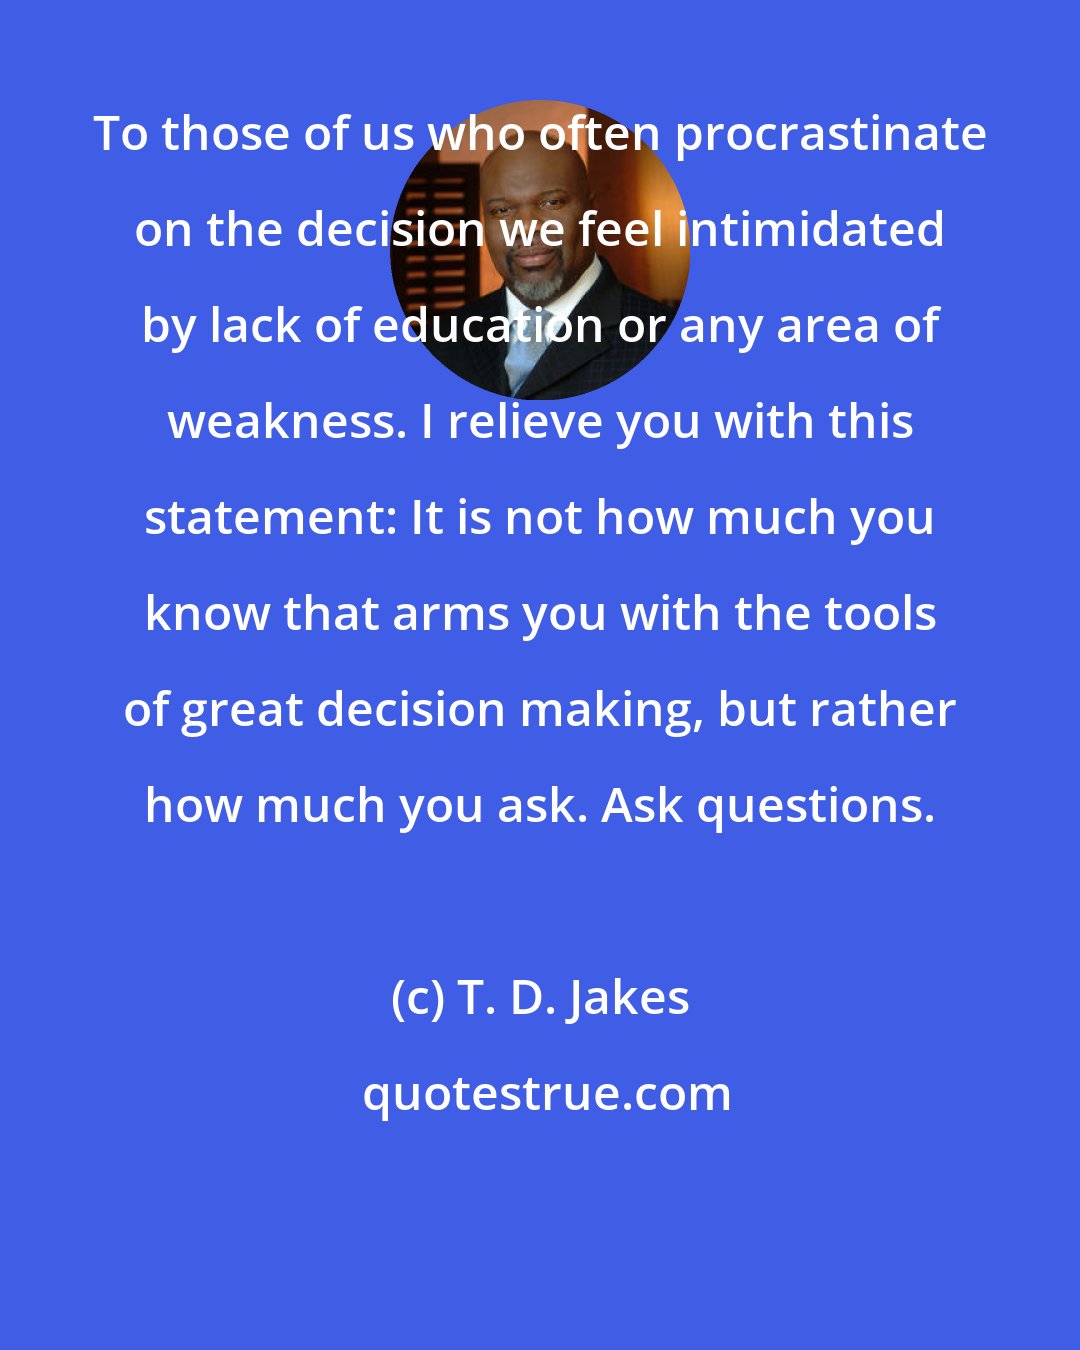 T. D. Jakes: To those of us who often procrastinate on the decision we feel intimidated by lack of education or any area of weakness. I relieve you with this statement: It is not how much you know that arms you with the tools of great decision making, but rather how much you ask. Ask questions.